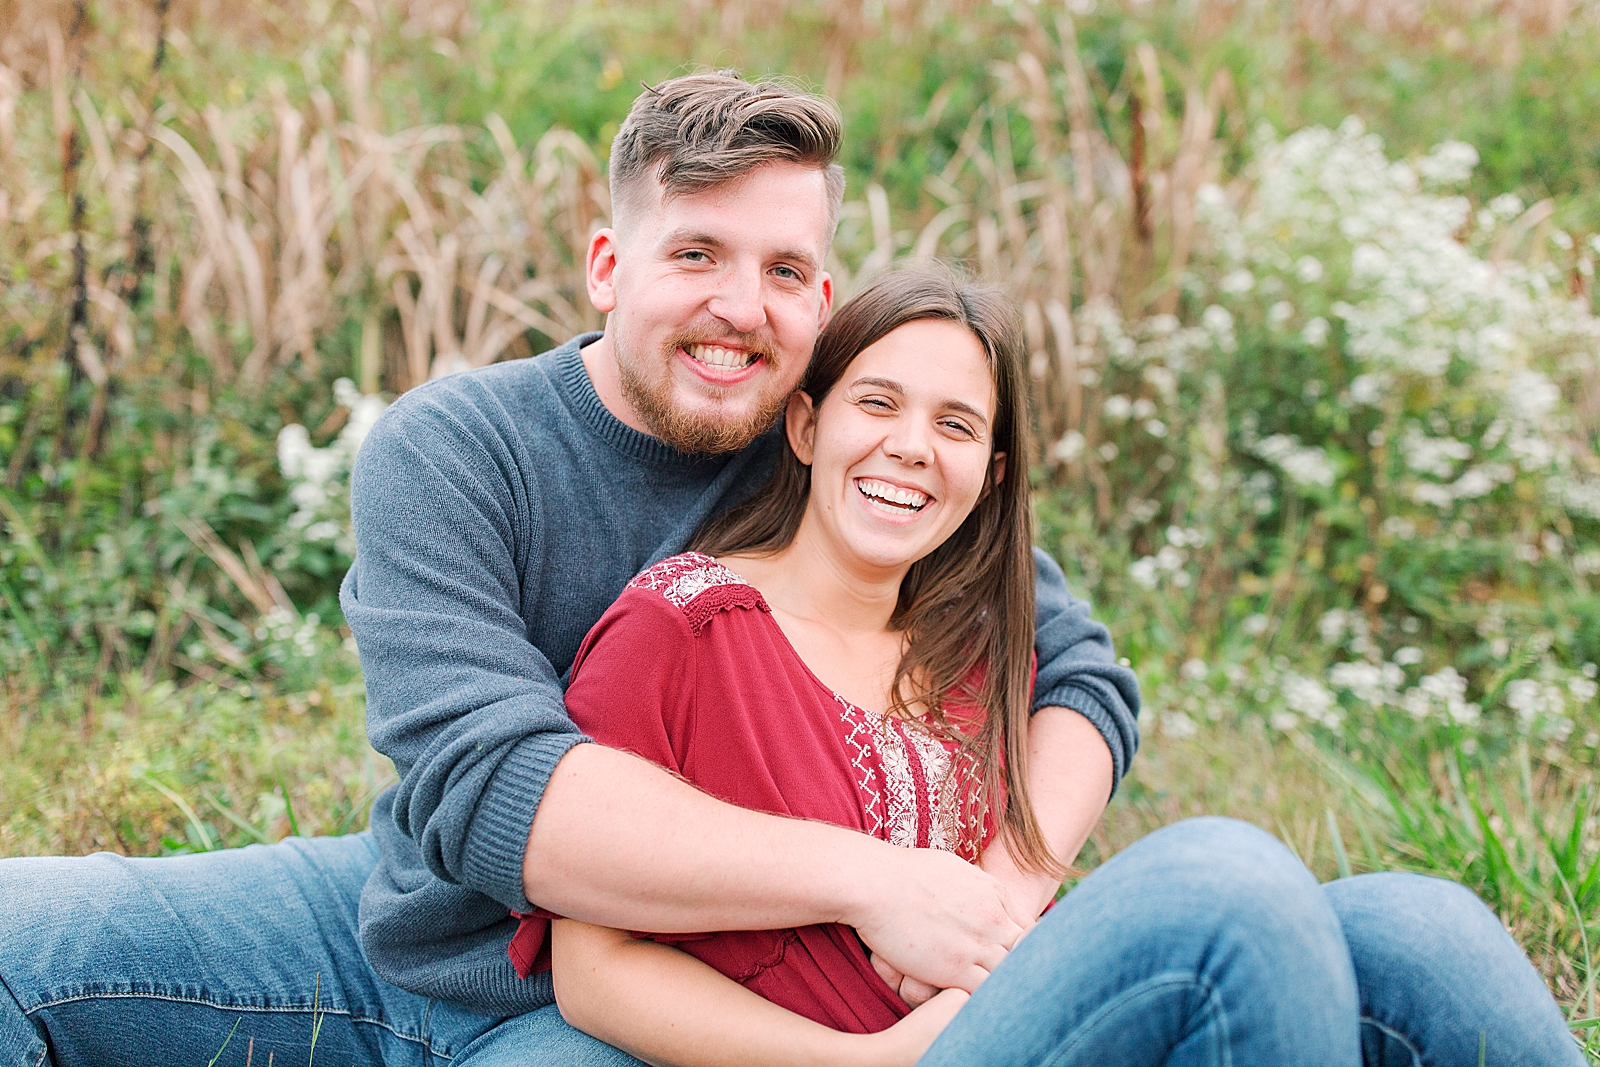  North Carolina Mountain Engagement Session Couple Smiling at Camera Sitting in Grass Photo